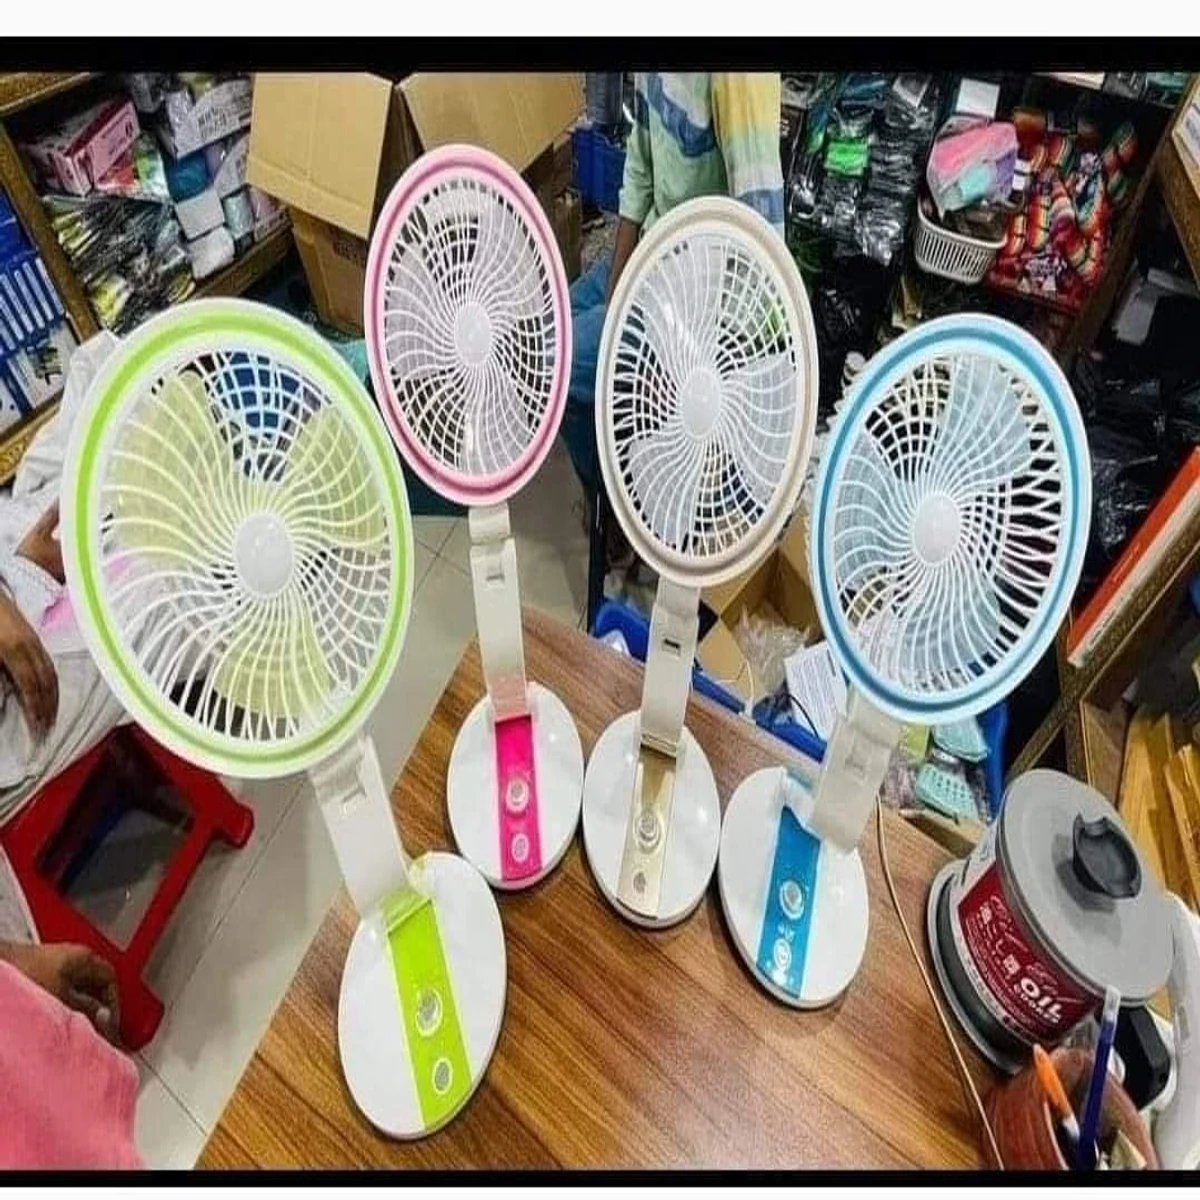 RECHARGEABLE & FOLDABLE FAN WITH LIGHT